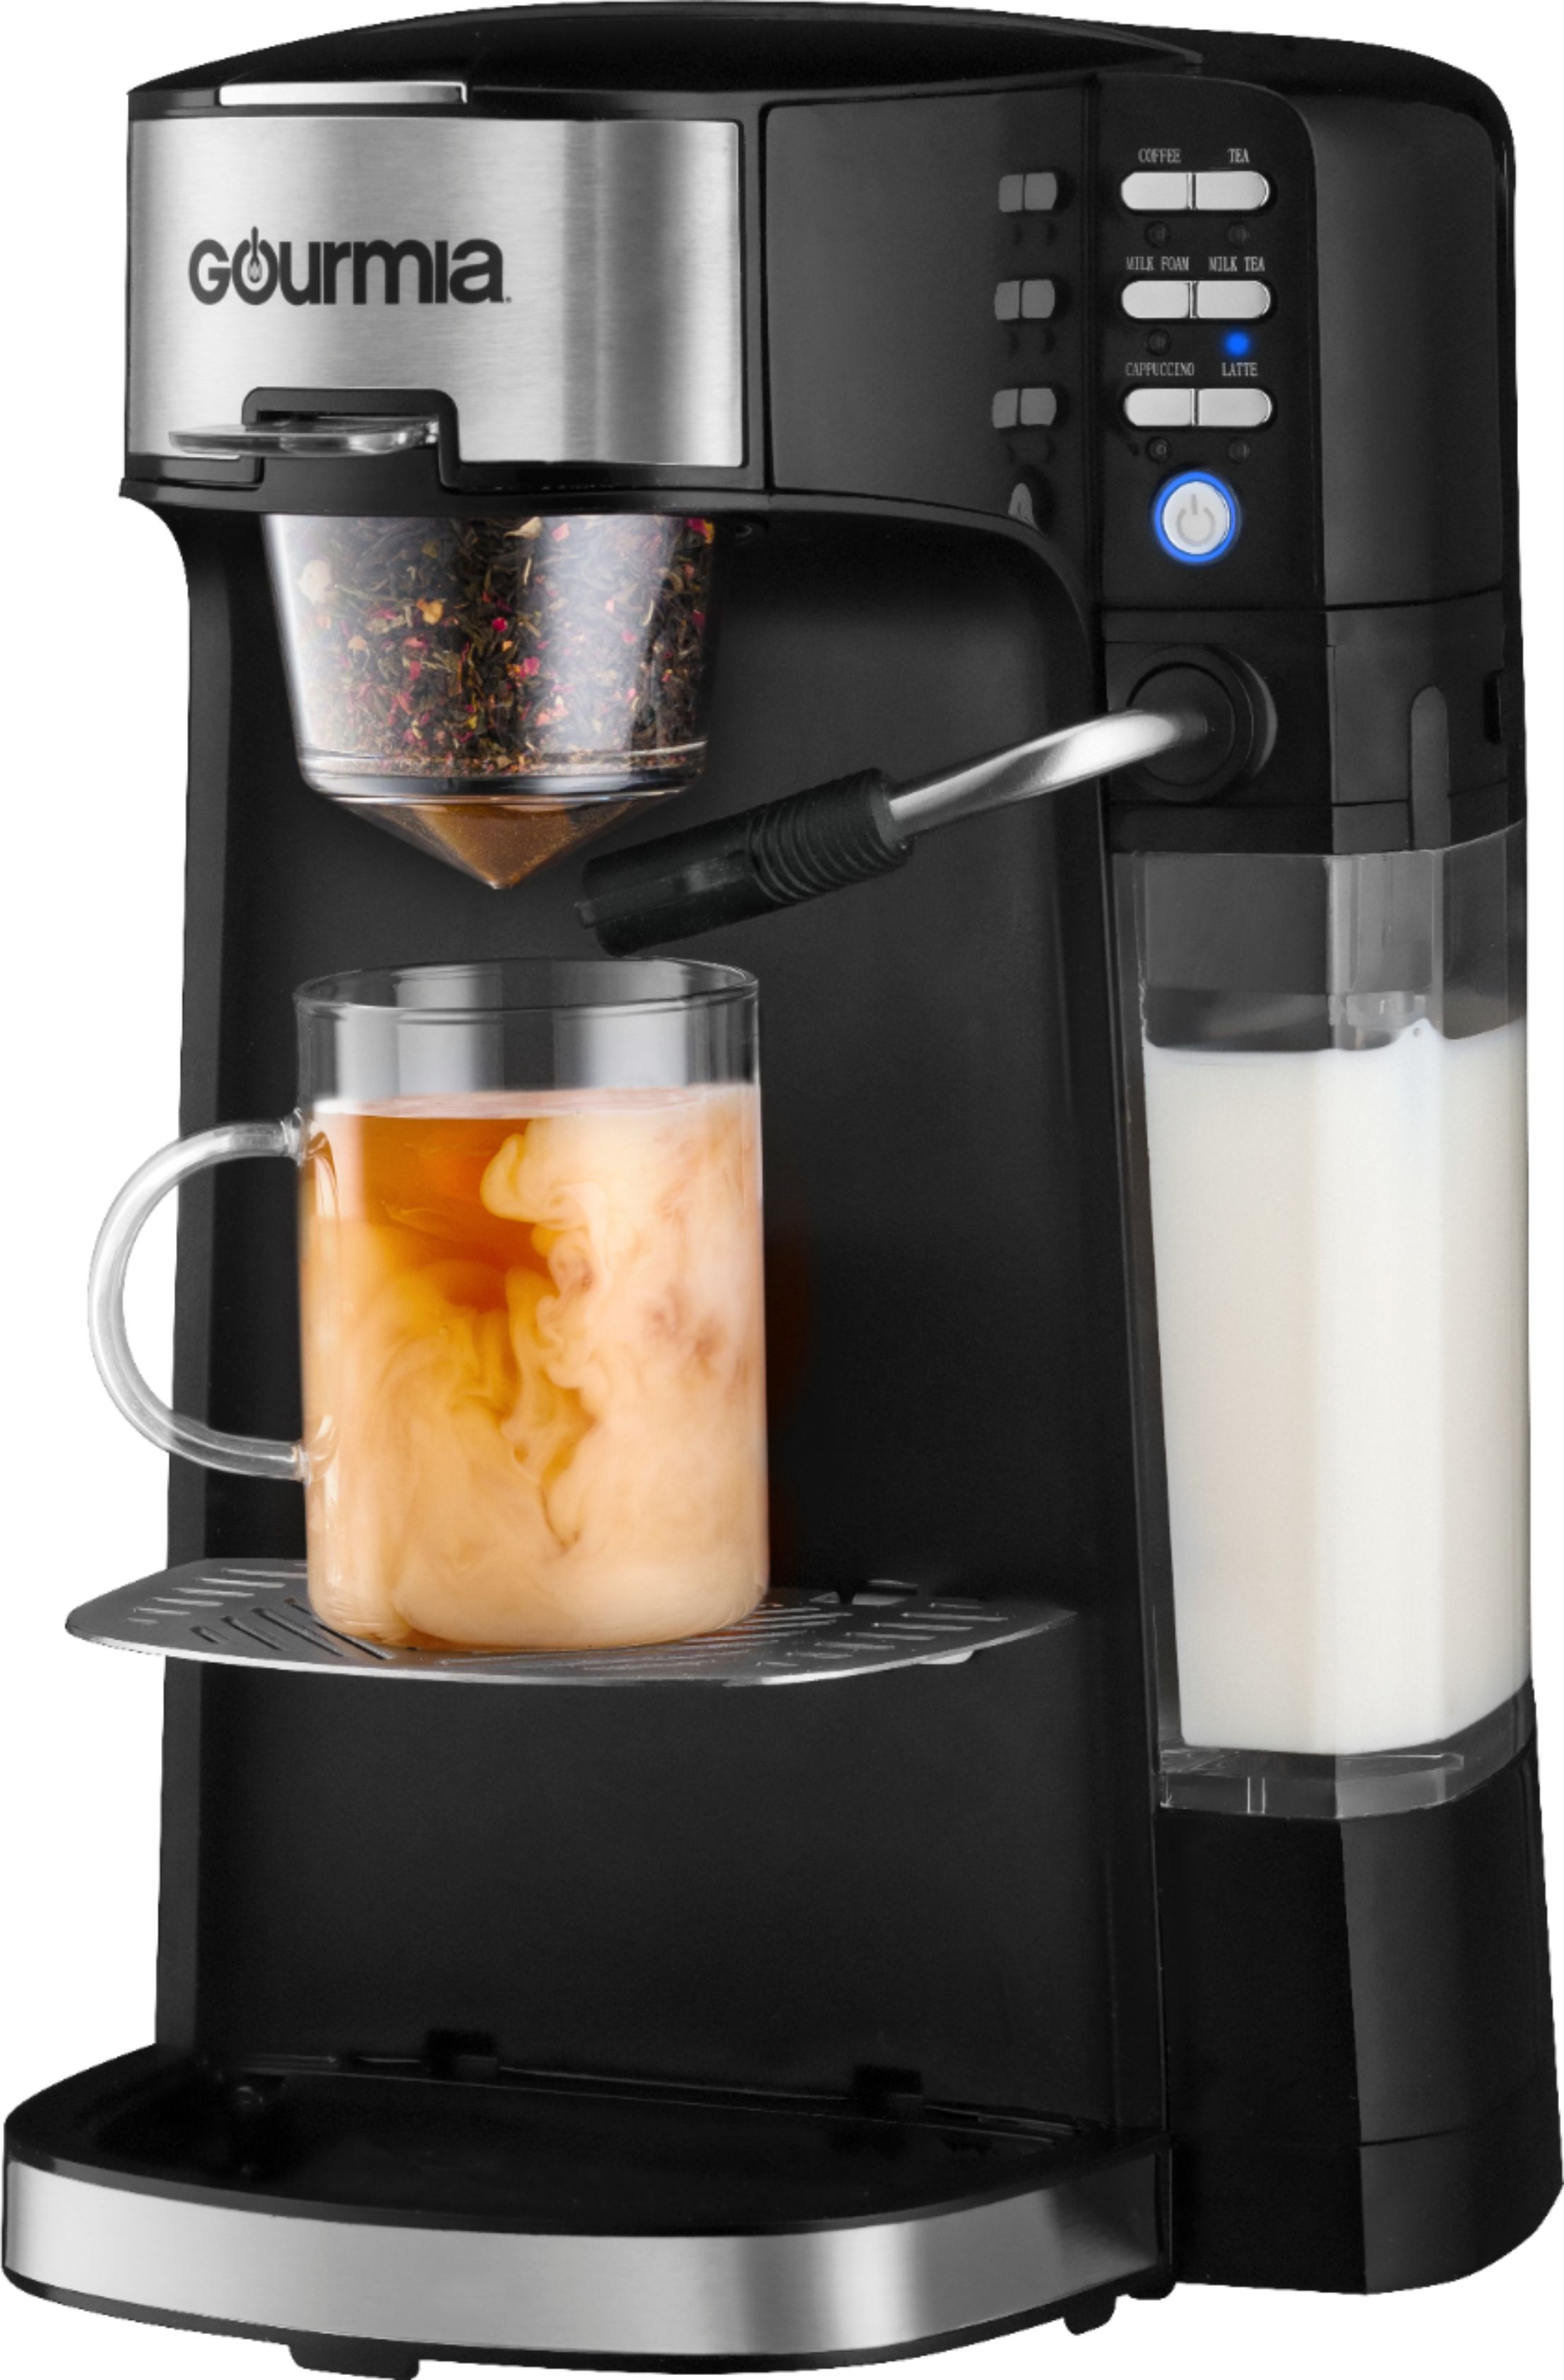 Gourmia Single Serve K-Cup Pod Coffee Maker with Built-In Frother  Black/Stainless Steel GCM6000 - Best Buy